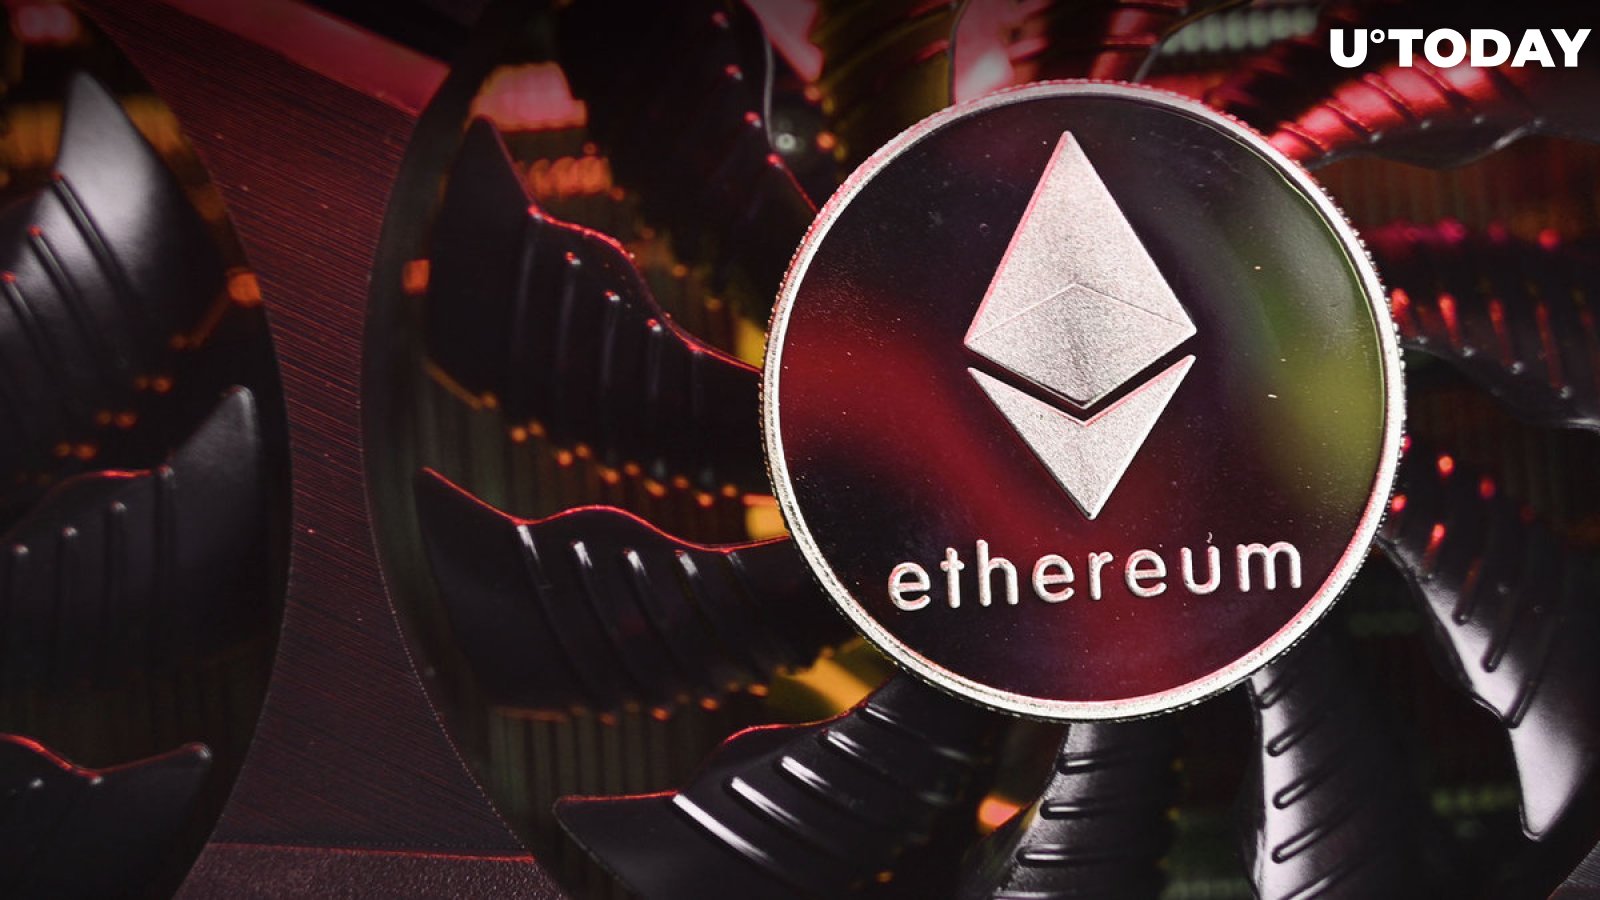 Ethereum Ropsten Testnet Shutting Down, Here's What You Need to Know